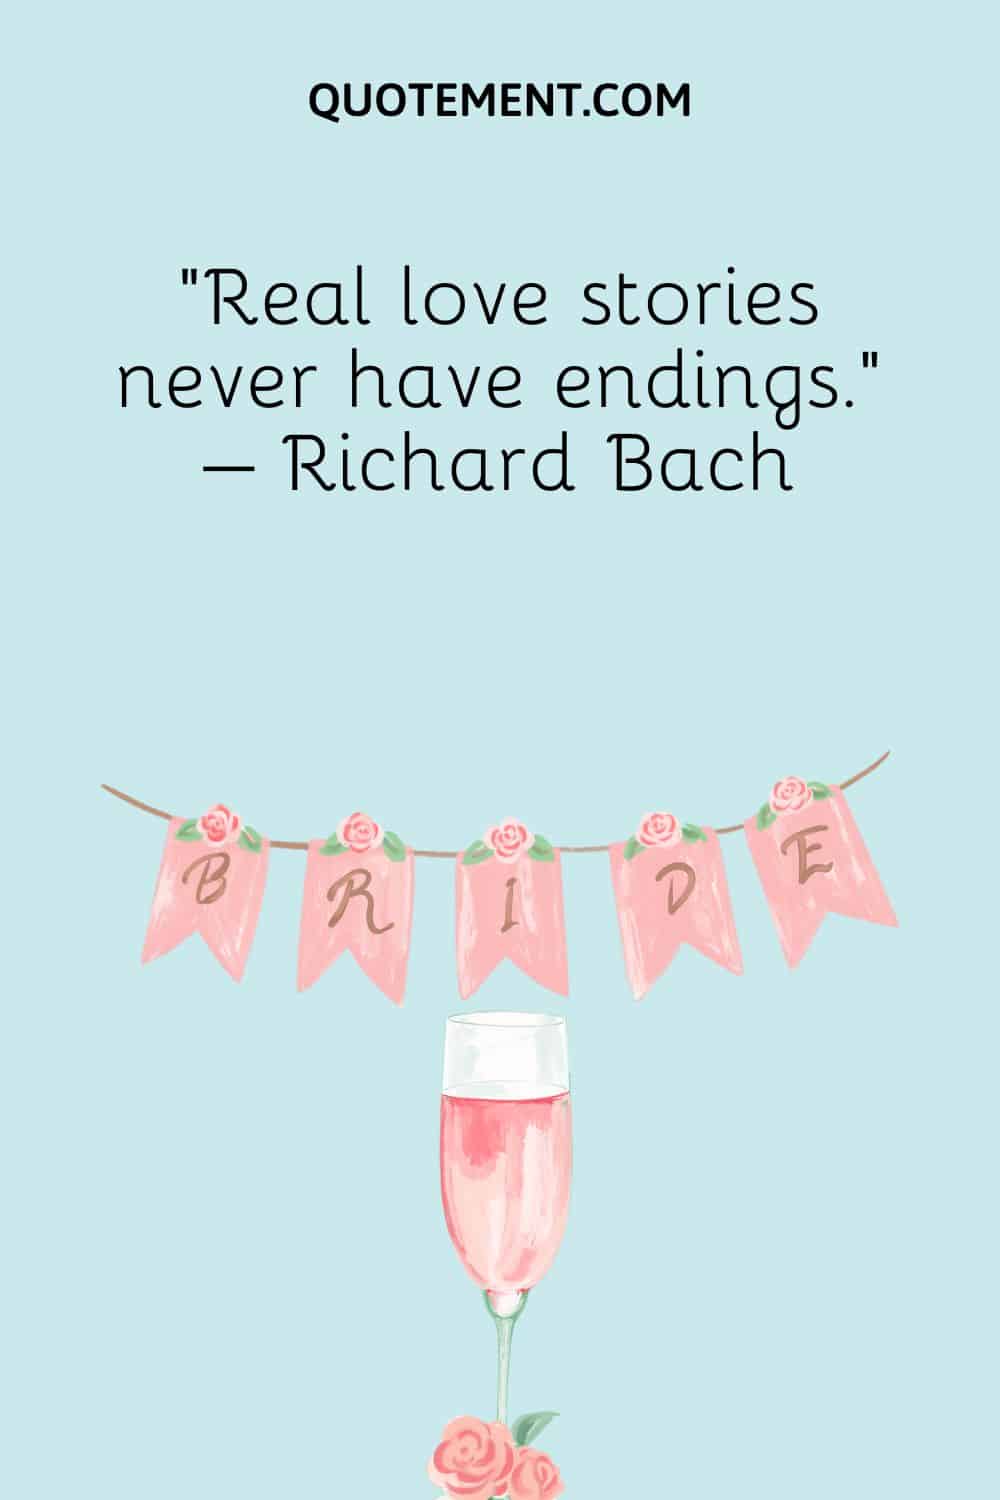 “Real love stories never have endings.” – Richard Bach